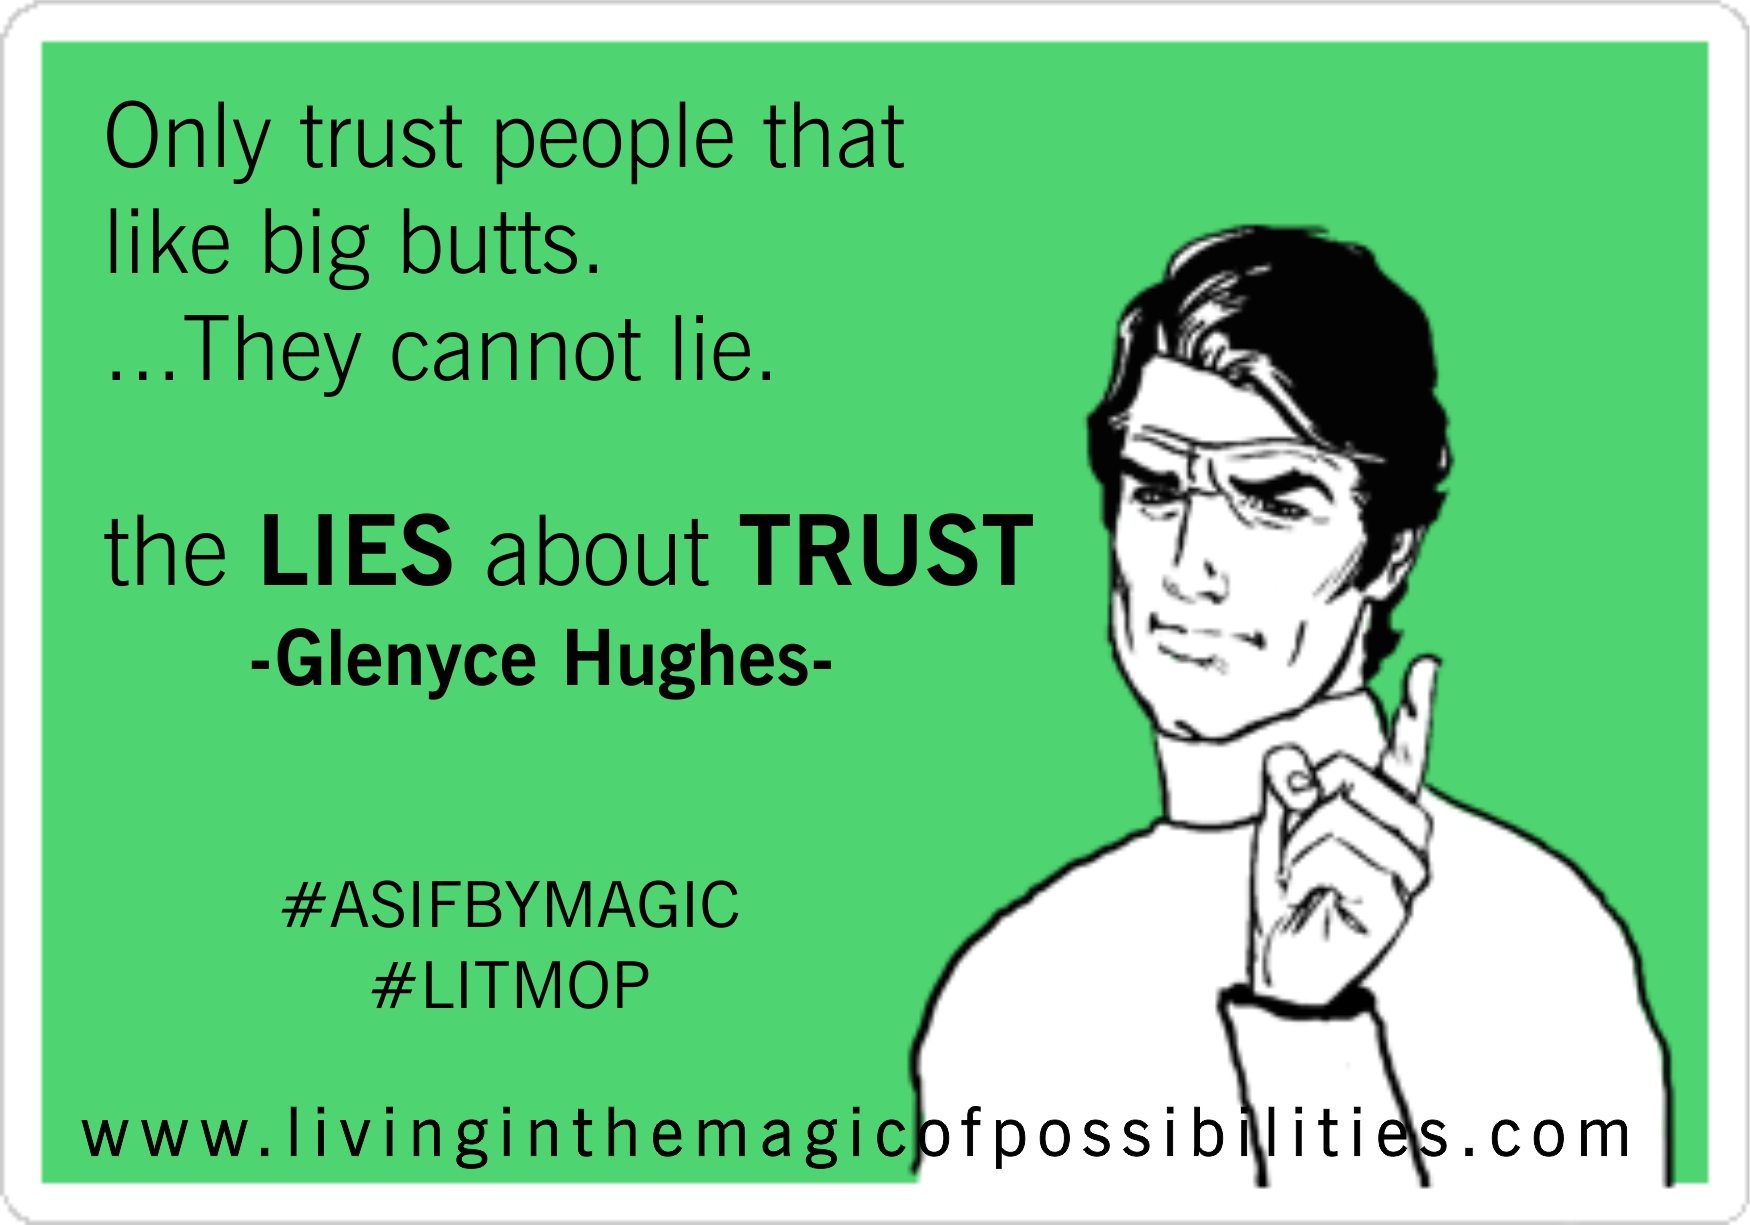 The Lies About Trust - Glenyce Hughes.